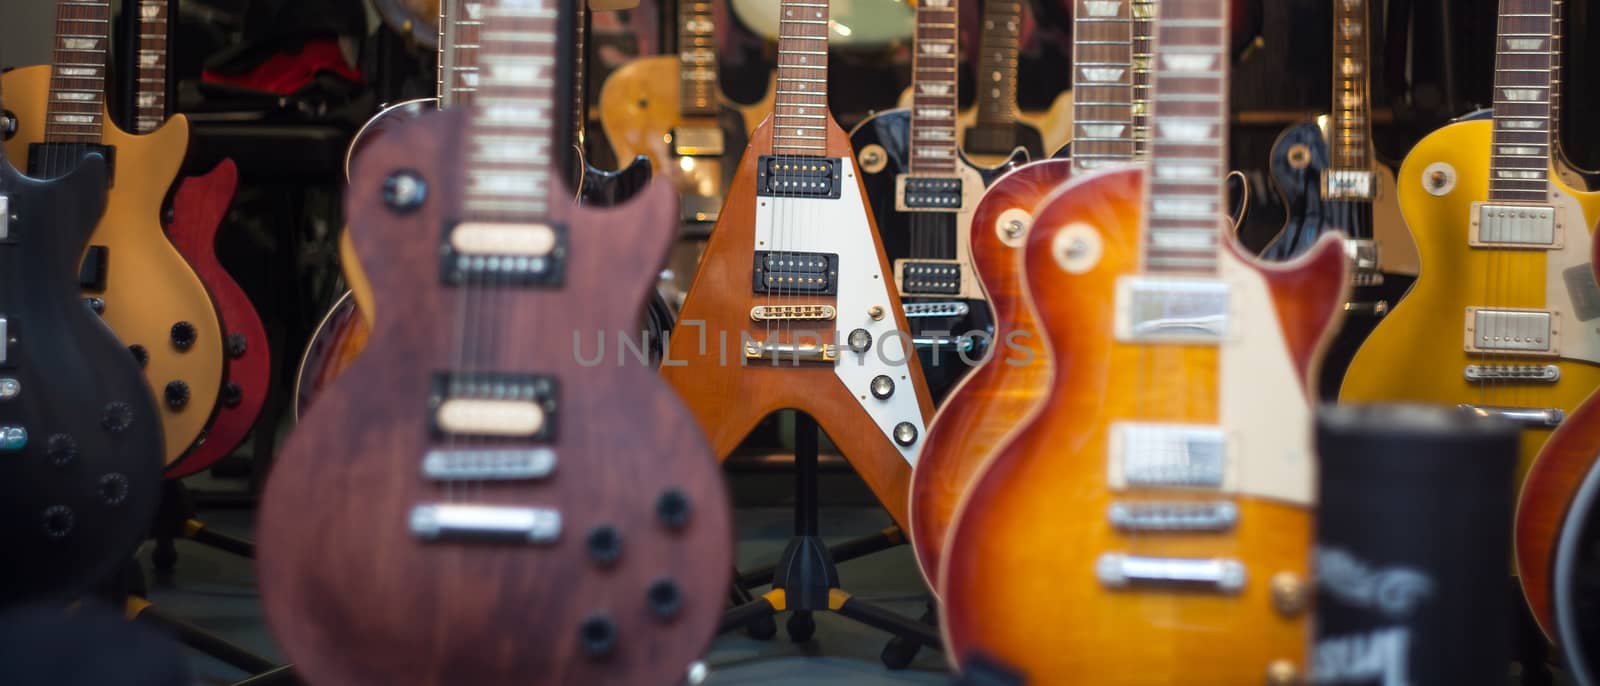 View of many guitars in the shop